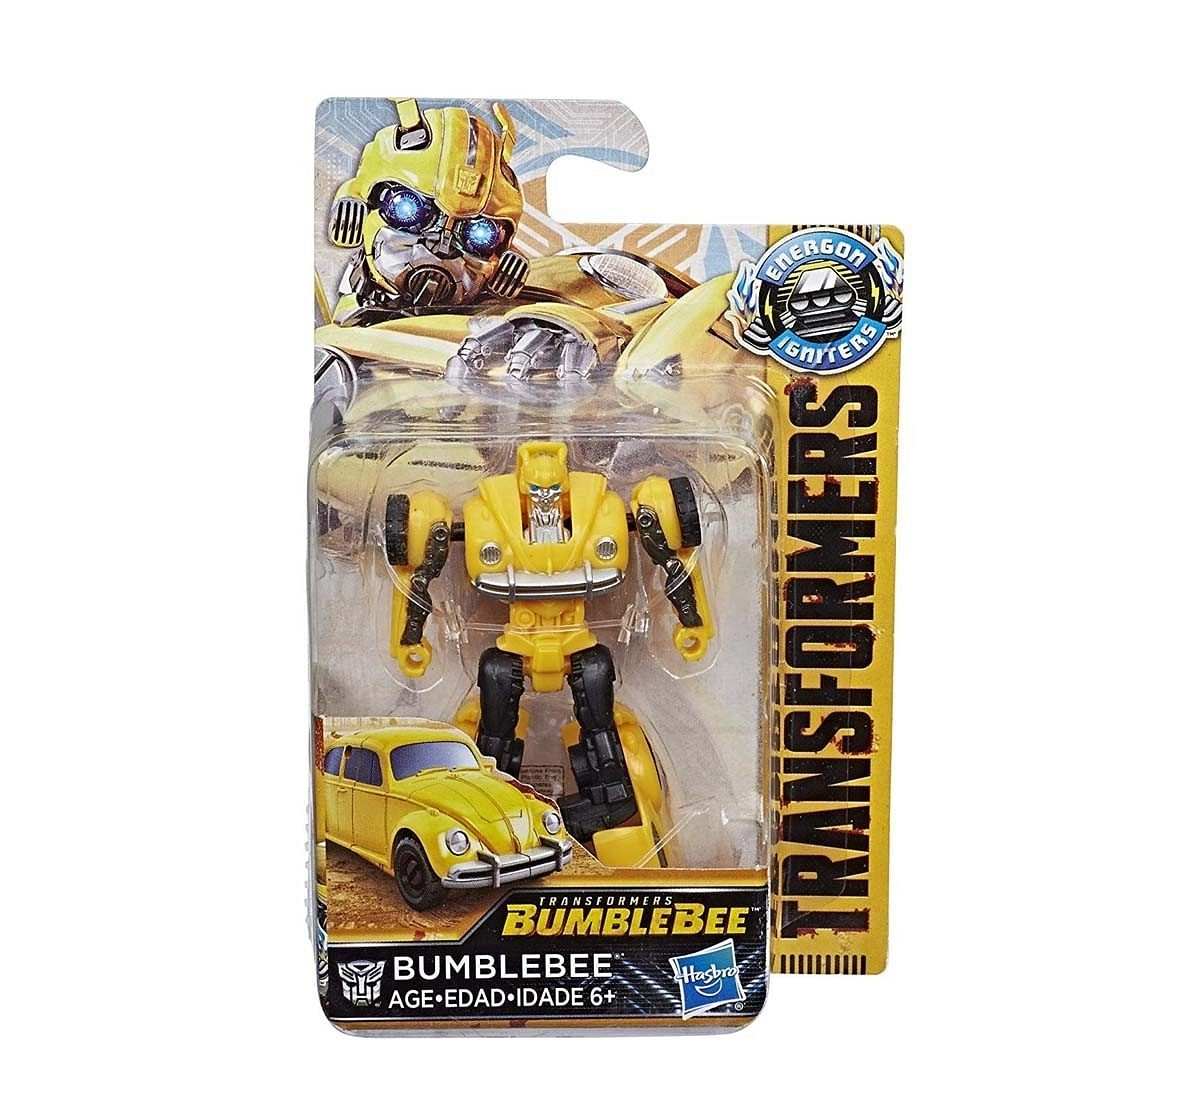 Transformers, Bumblebee Movie Toys, Energon Igniters Speed Series ,Multi Color Action Figures for age 3Y+ 